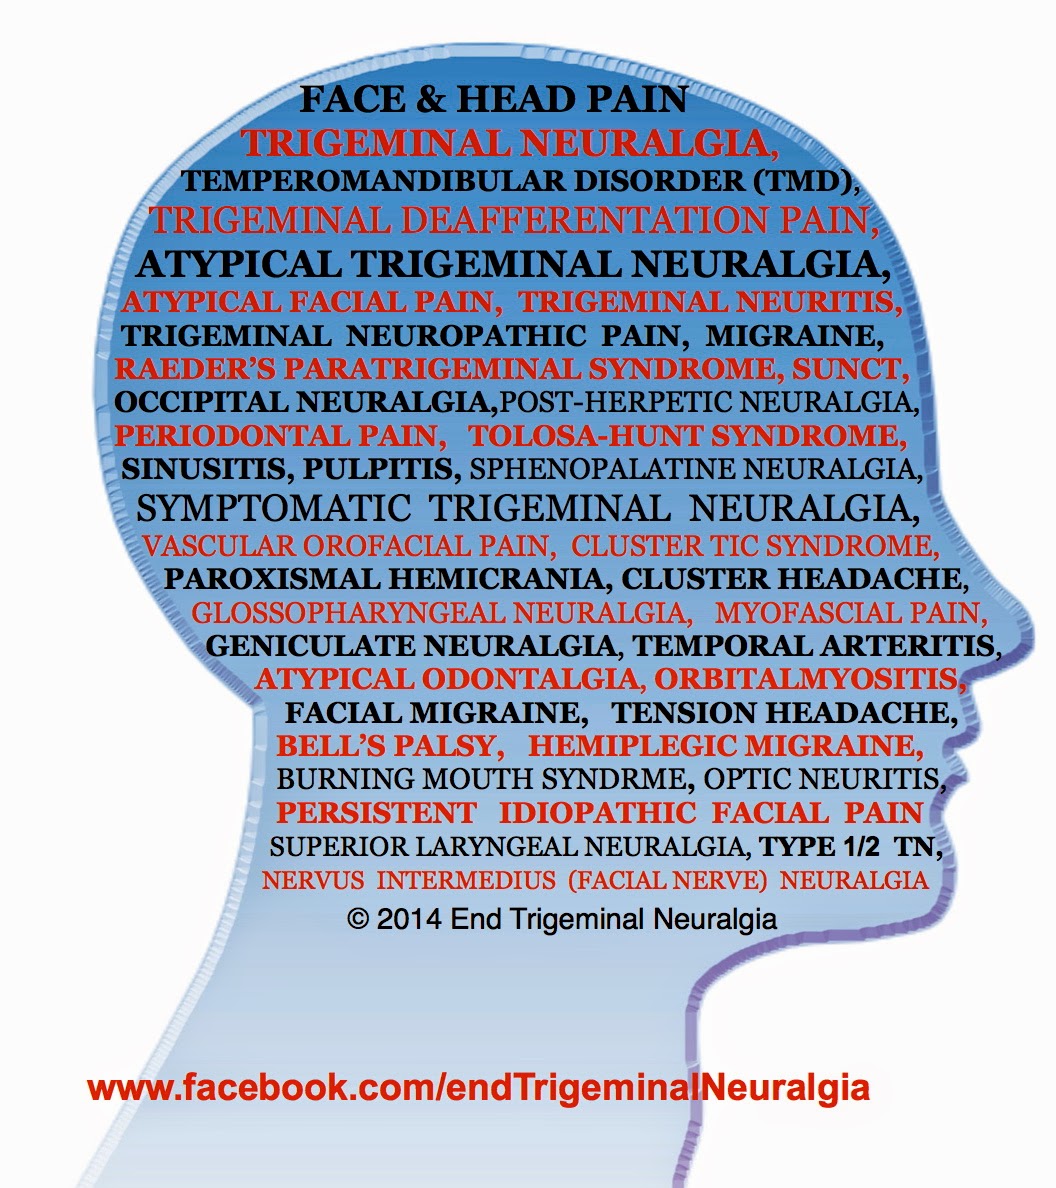 End Trigeminal Neuralgia: It's Not Just About Trigeminal Neuralgia...